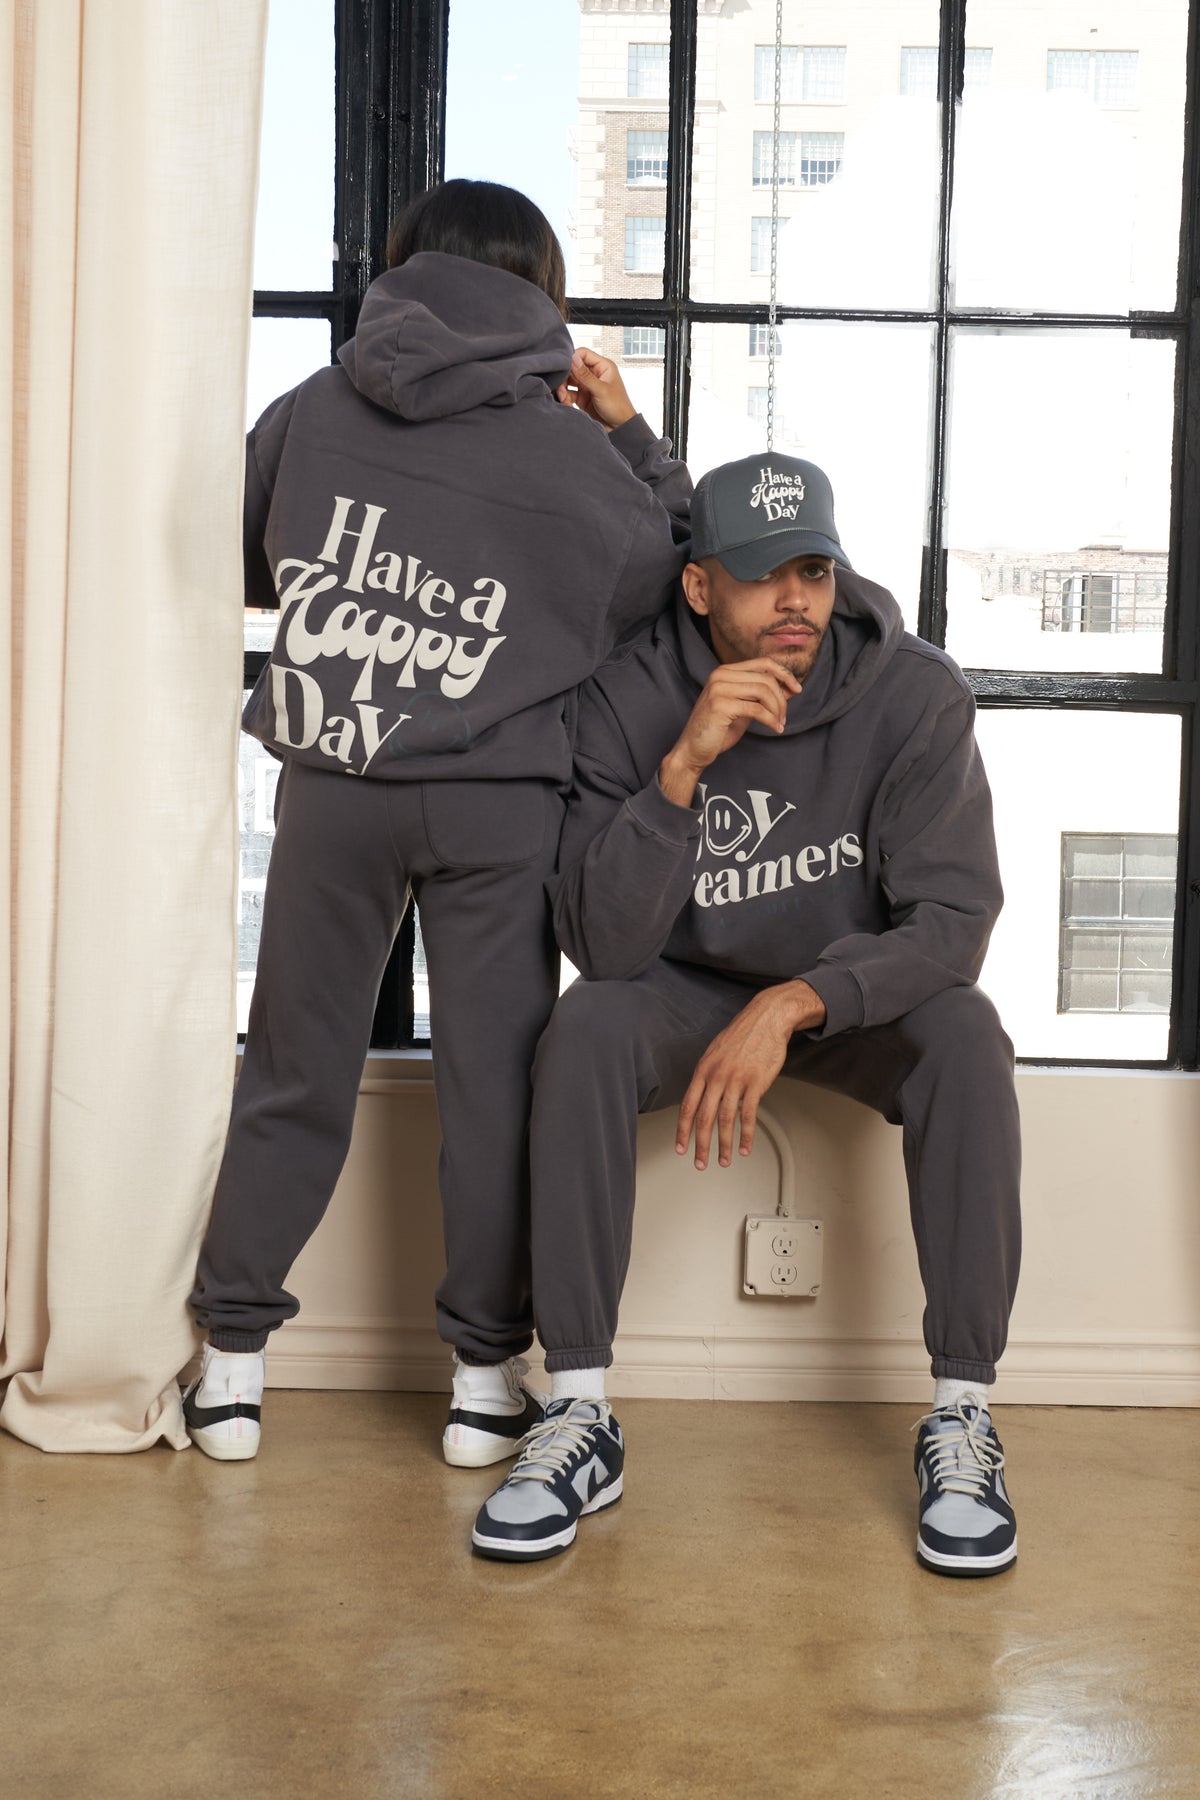 We're All Dreamers Joggers + Hoodie combo. What y'all think of the